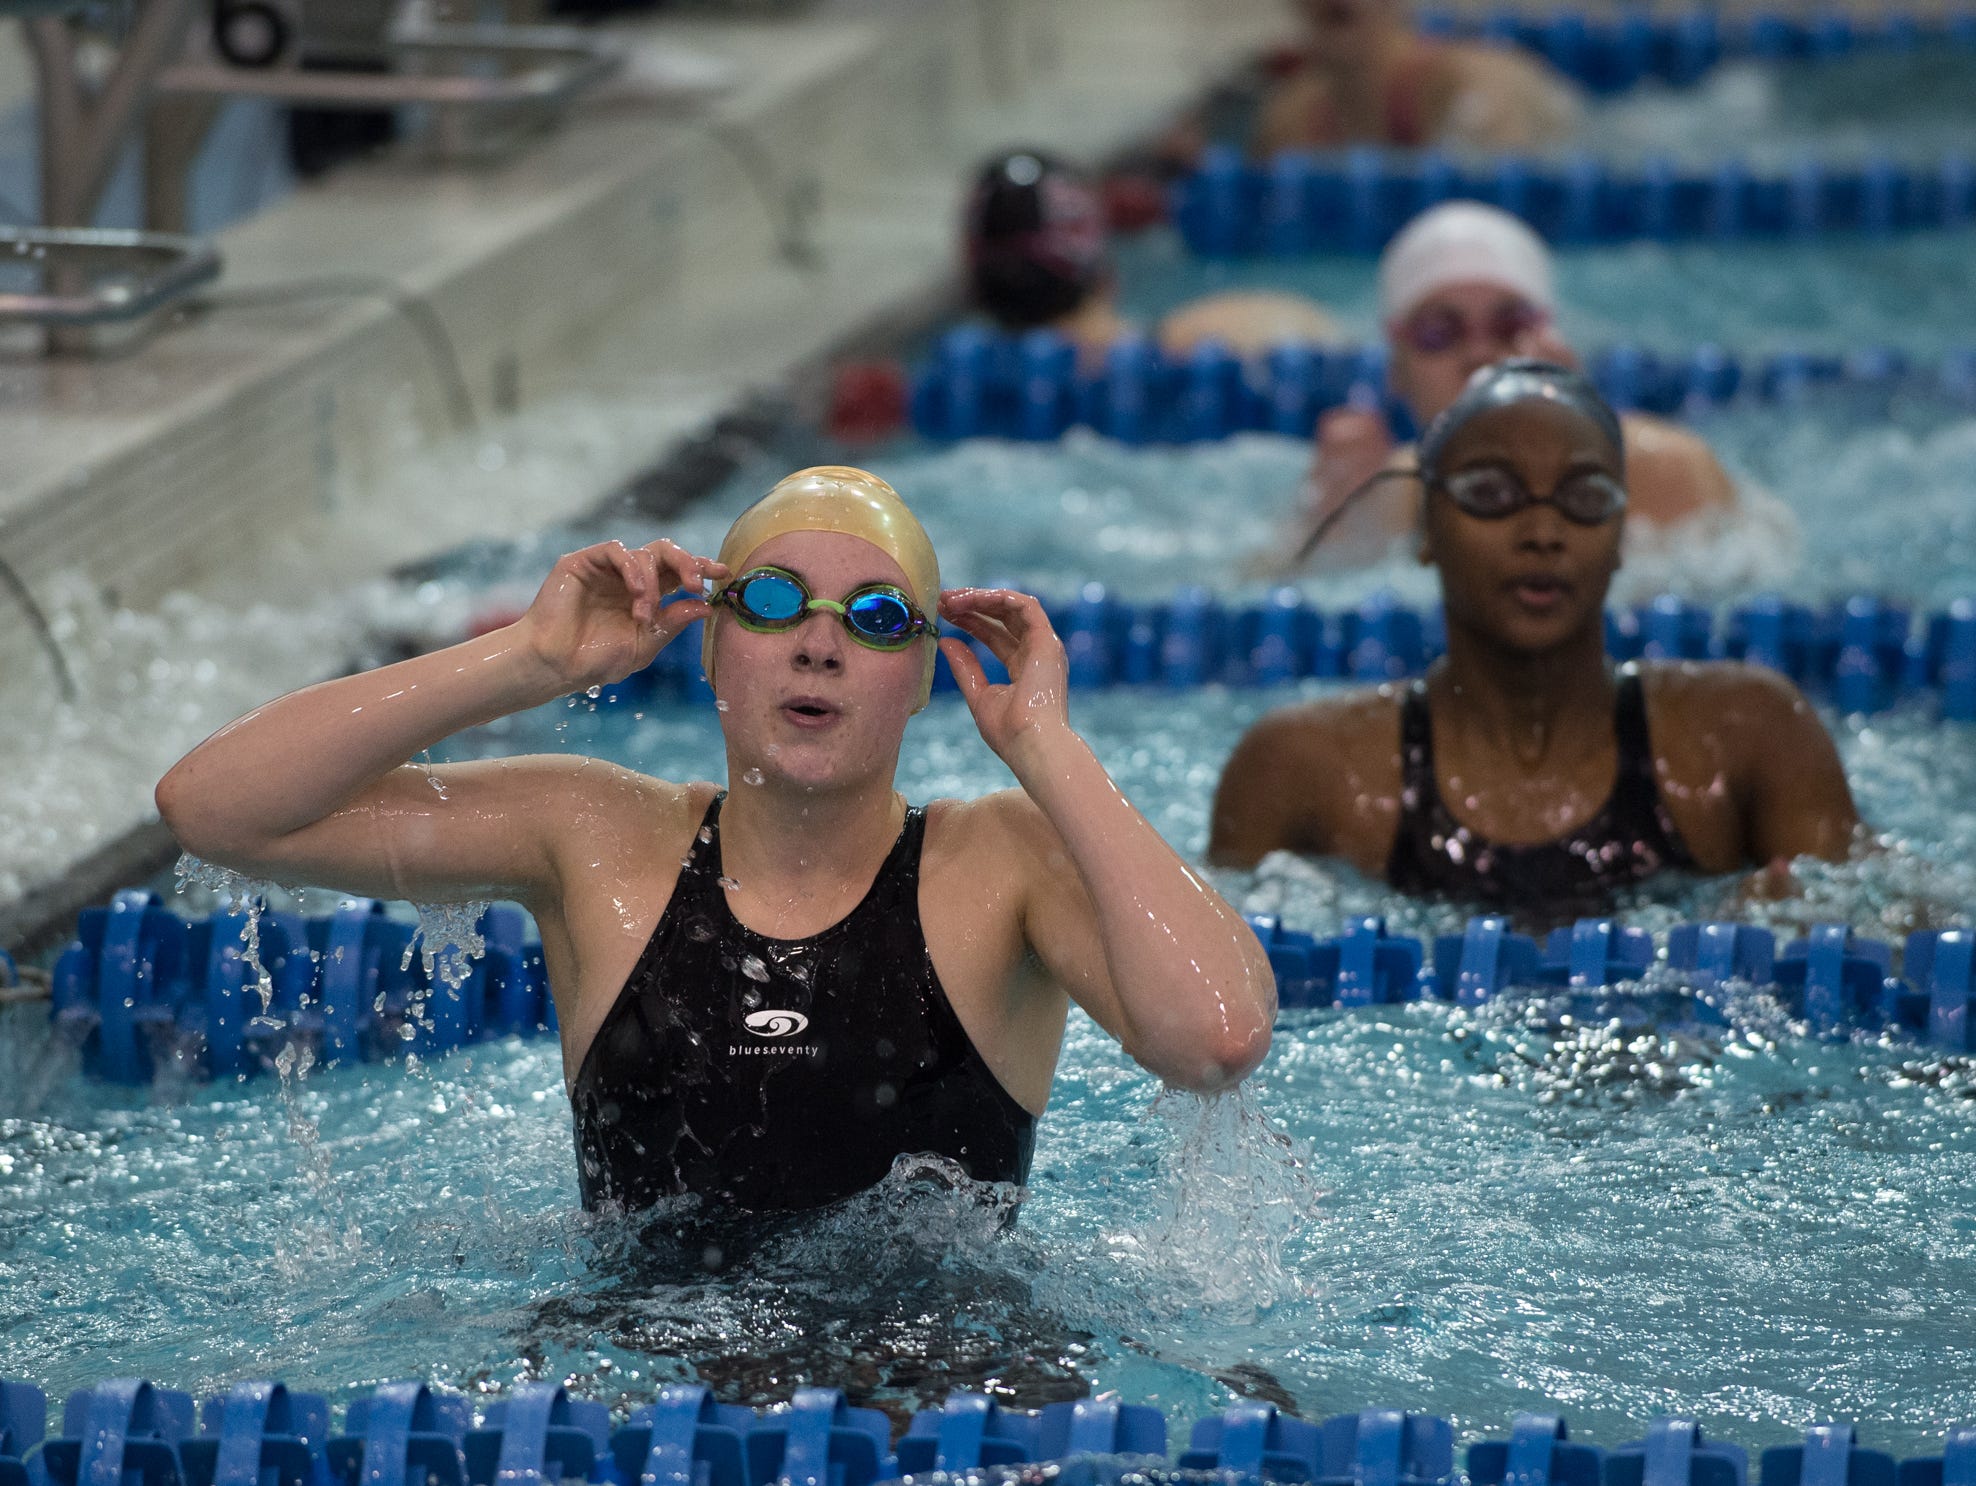 Delaware Military Academy's Kelly Blake looks at the score board after competing in the 50 yard freestyle final at the girl's DIAA swimming and diving championships at the University of Delaware.